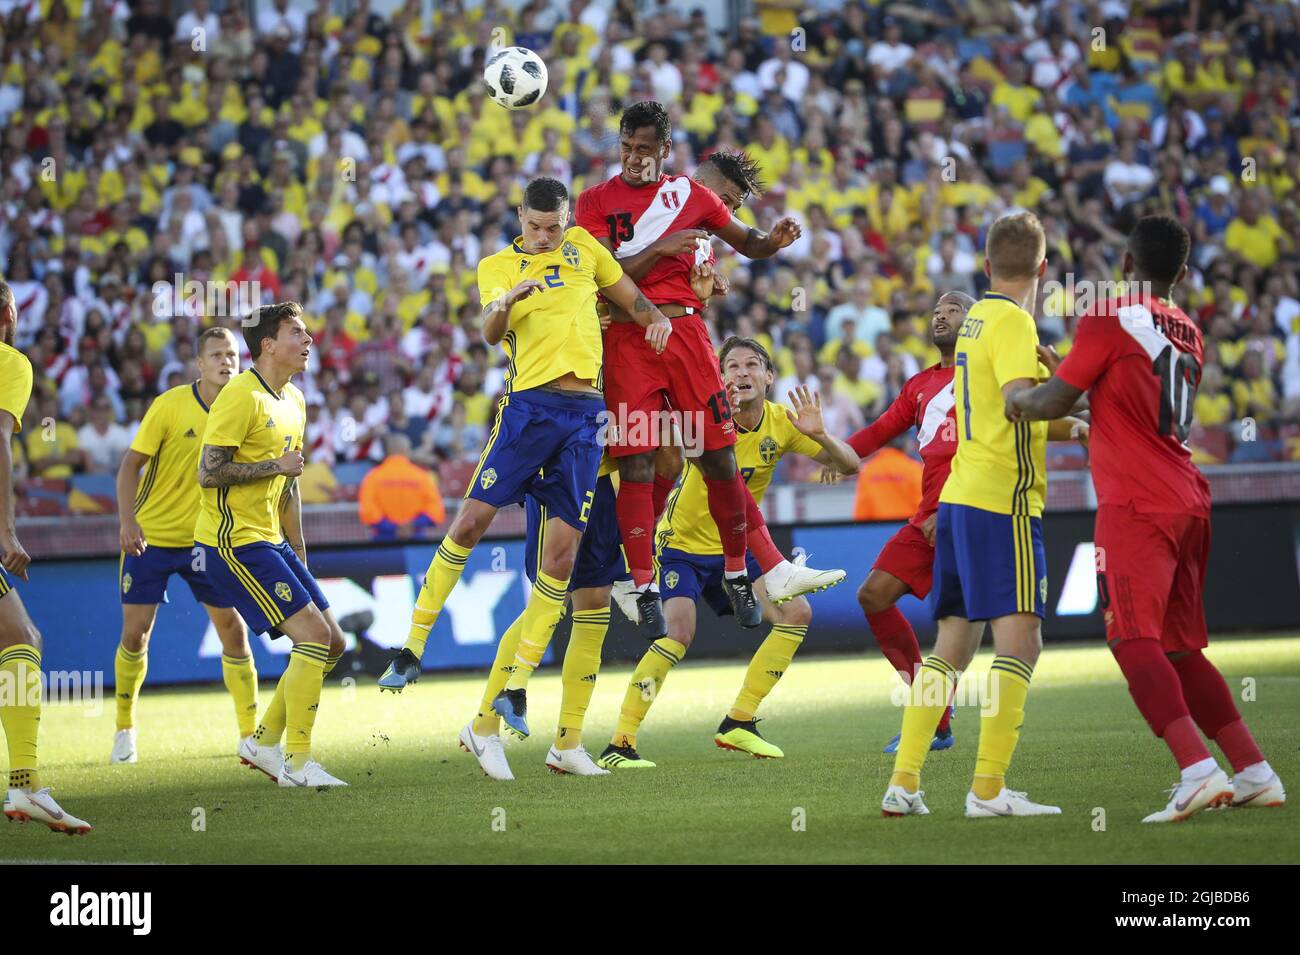 Sweden's Mikael Lustig (2) fights for the ball with Peru's Renato Tapia (13) during the international friendly soccer match between Sweden and Peru at the Ullevi stadium i Gothenburg, Sweden, on June 9, 2018. Photo: Adam Ihse / TT / code 9200  Stock Photo